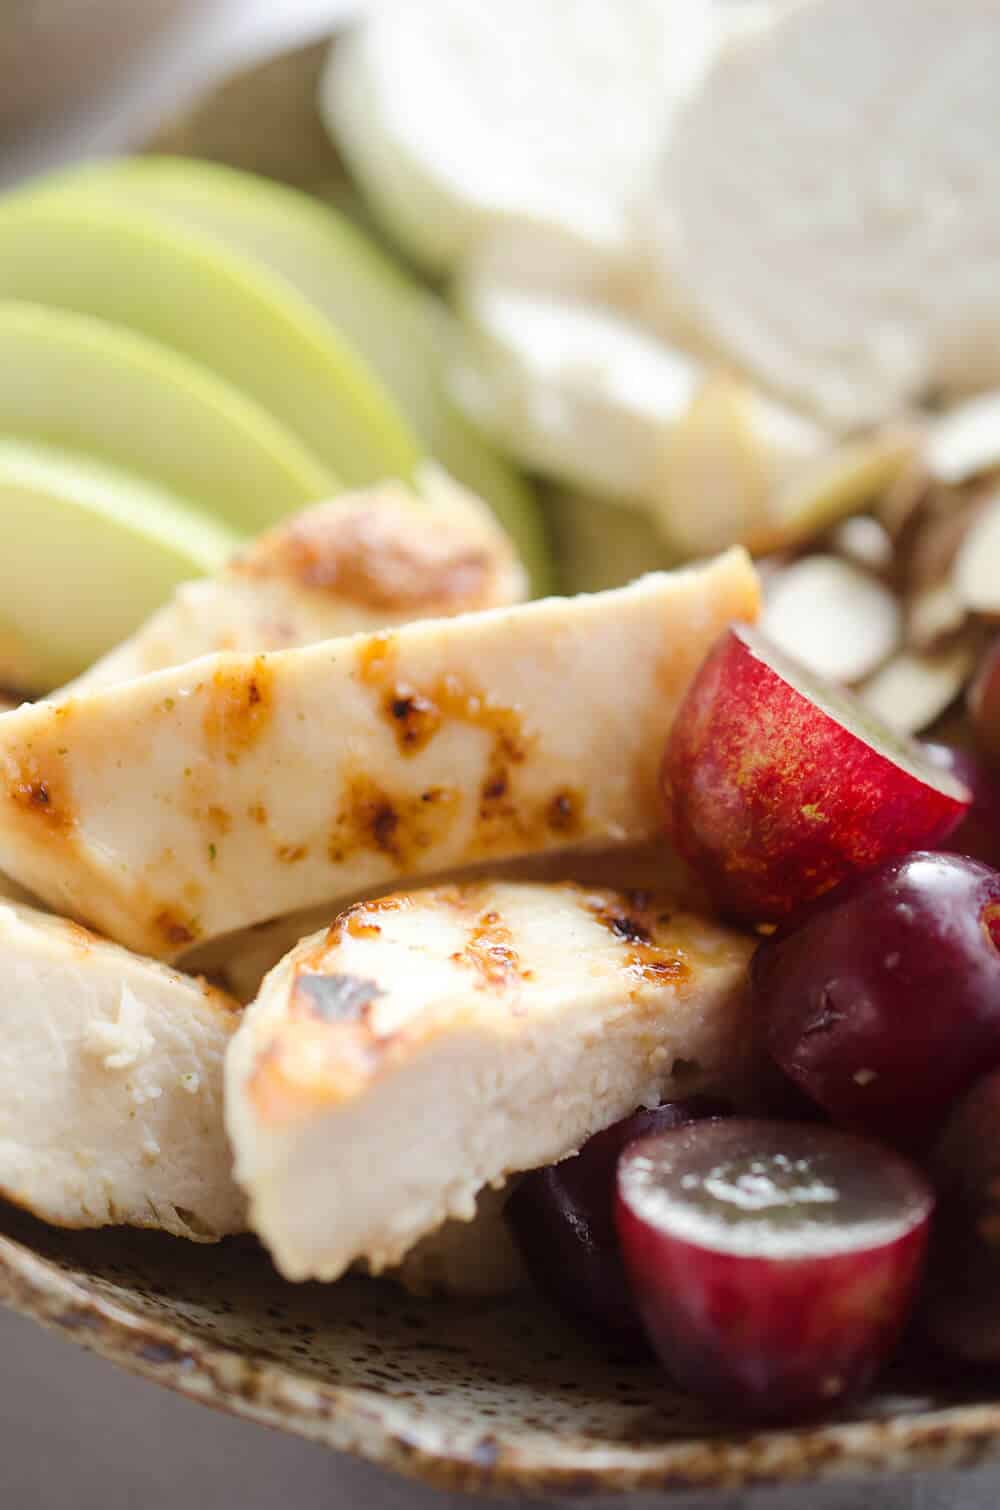 Fruit & Goat Cheese Chicken Bowls are an easy 5 ingredient recipe for a healthy dinner loaded with sweet and savory flavors. Tender chicken breasts are paired with juicy grapes, apples, almonds and creamy honey goat cheese for an amazingly simple and protein packed meal ready in only 15 minutes!